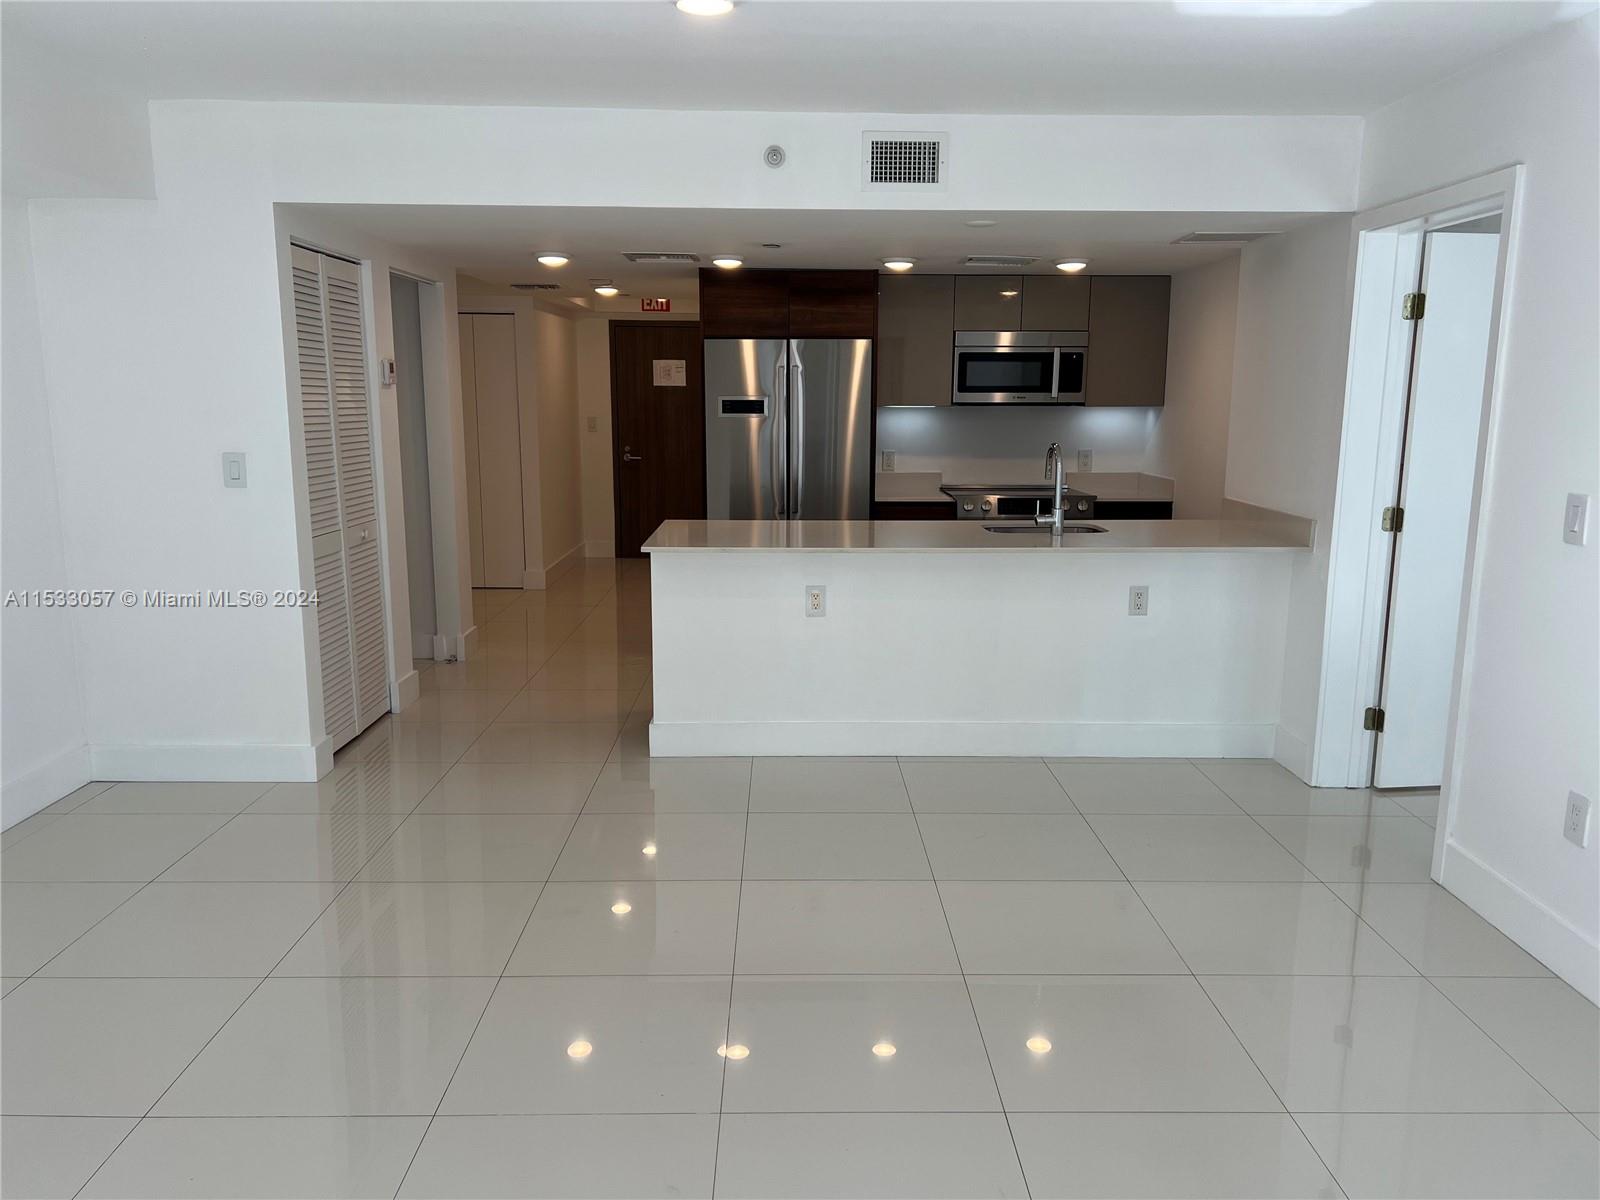 You will love this 1bd + den unit , with 2 full baths. Feels like a 2bd apt. big spaces, luminous and modern. Great boutique building with a wonderful roof top pool. Walking distance to everything. Supermarkets, restaurants, Bal Harbor mall.